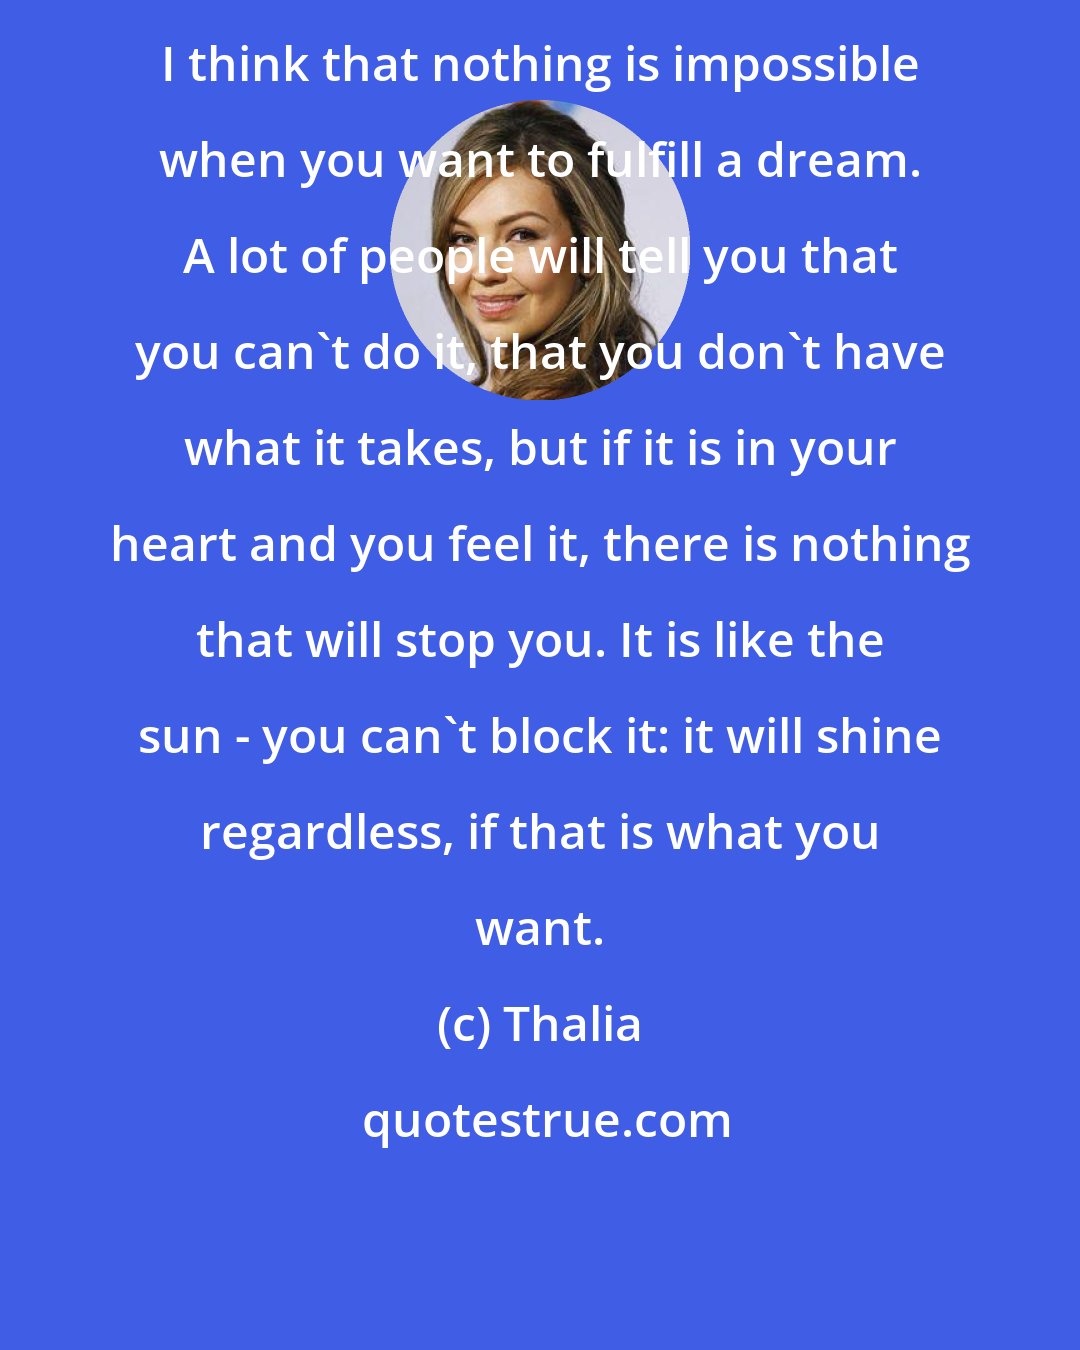 Thalia: I think that nothing is impossible when you want to fulfill a dream. A lot of people will tell you that you can't do it, that you don't have what it takes, but if it is in your heart and you feel it, there is nothing that will stop you. It is like the sun - you can't block it: it will shine regardless, if that is what you want.